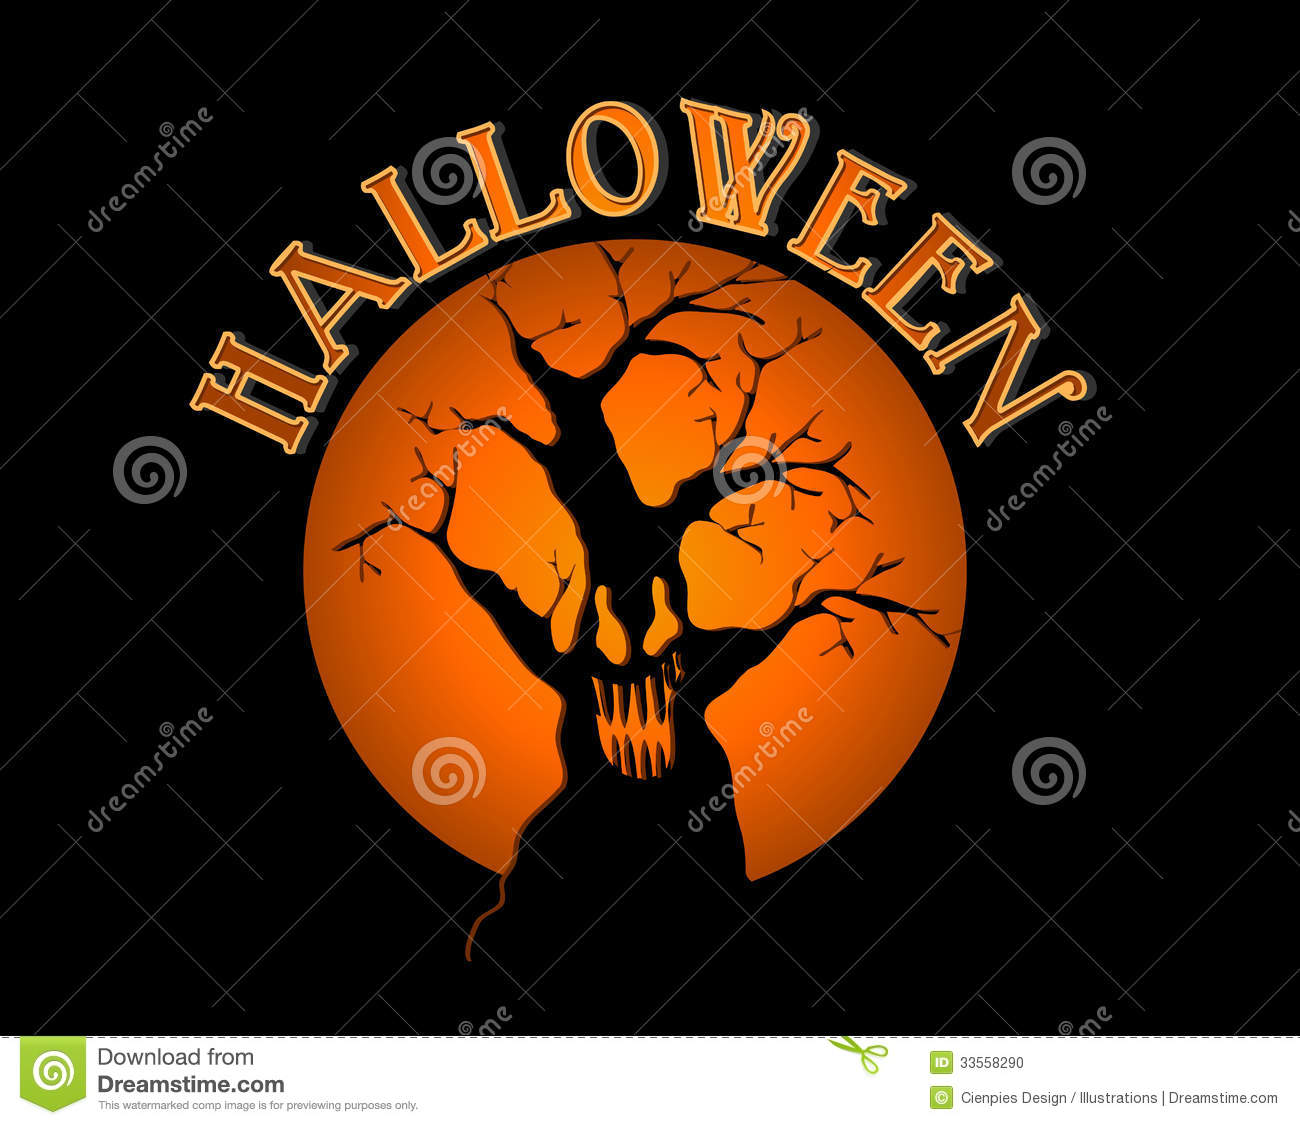 Halloween Text Over Spooky Tree And Text Inside Orange Full Moon